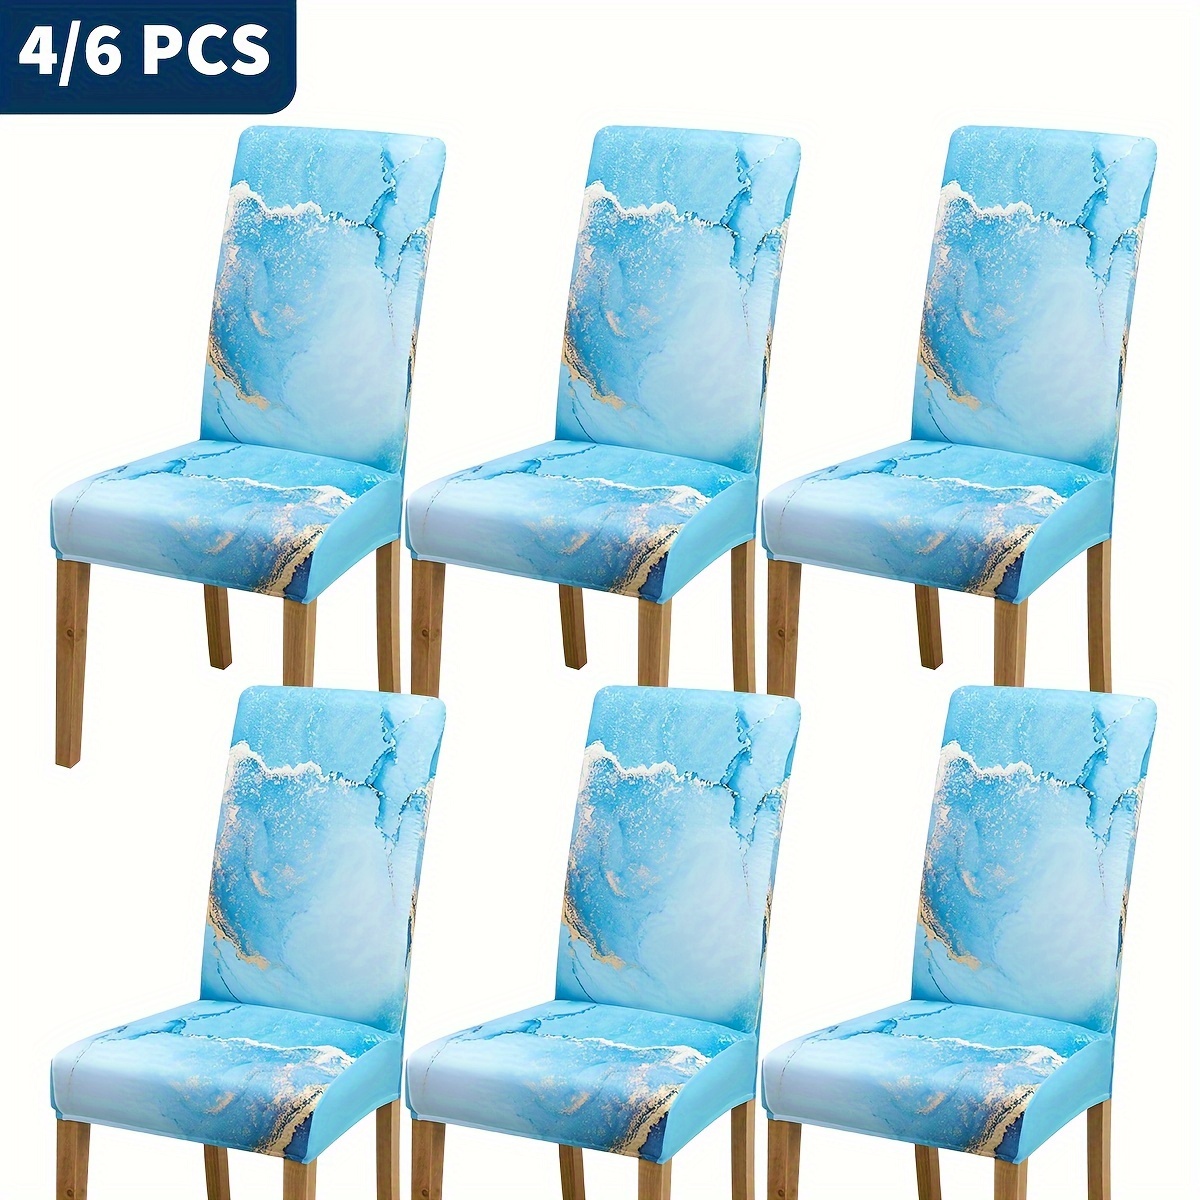 

4/6pcs Blue Marble Pattern Chair Slipcovers, Dining Chair Cover, Furniture Protective Cover, For Dining Room Living Room Office Home Decor